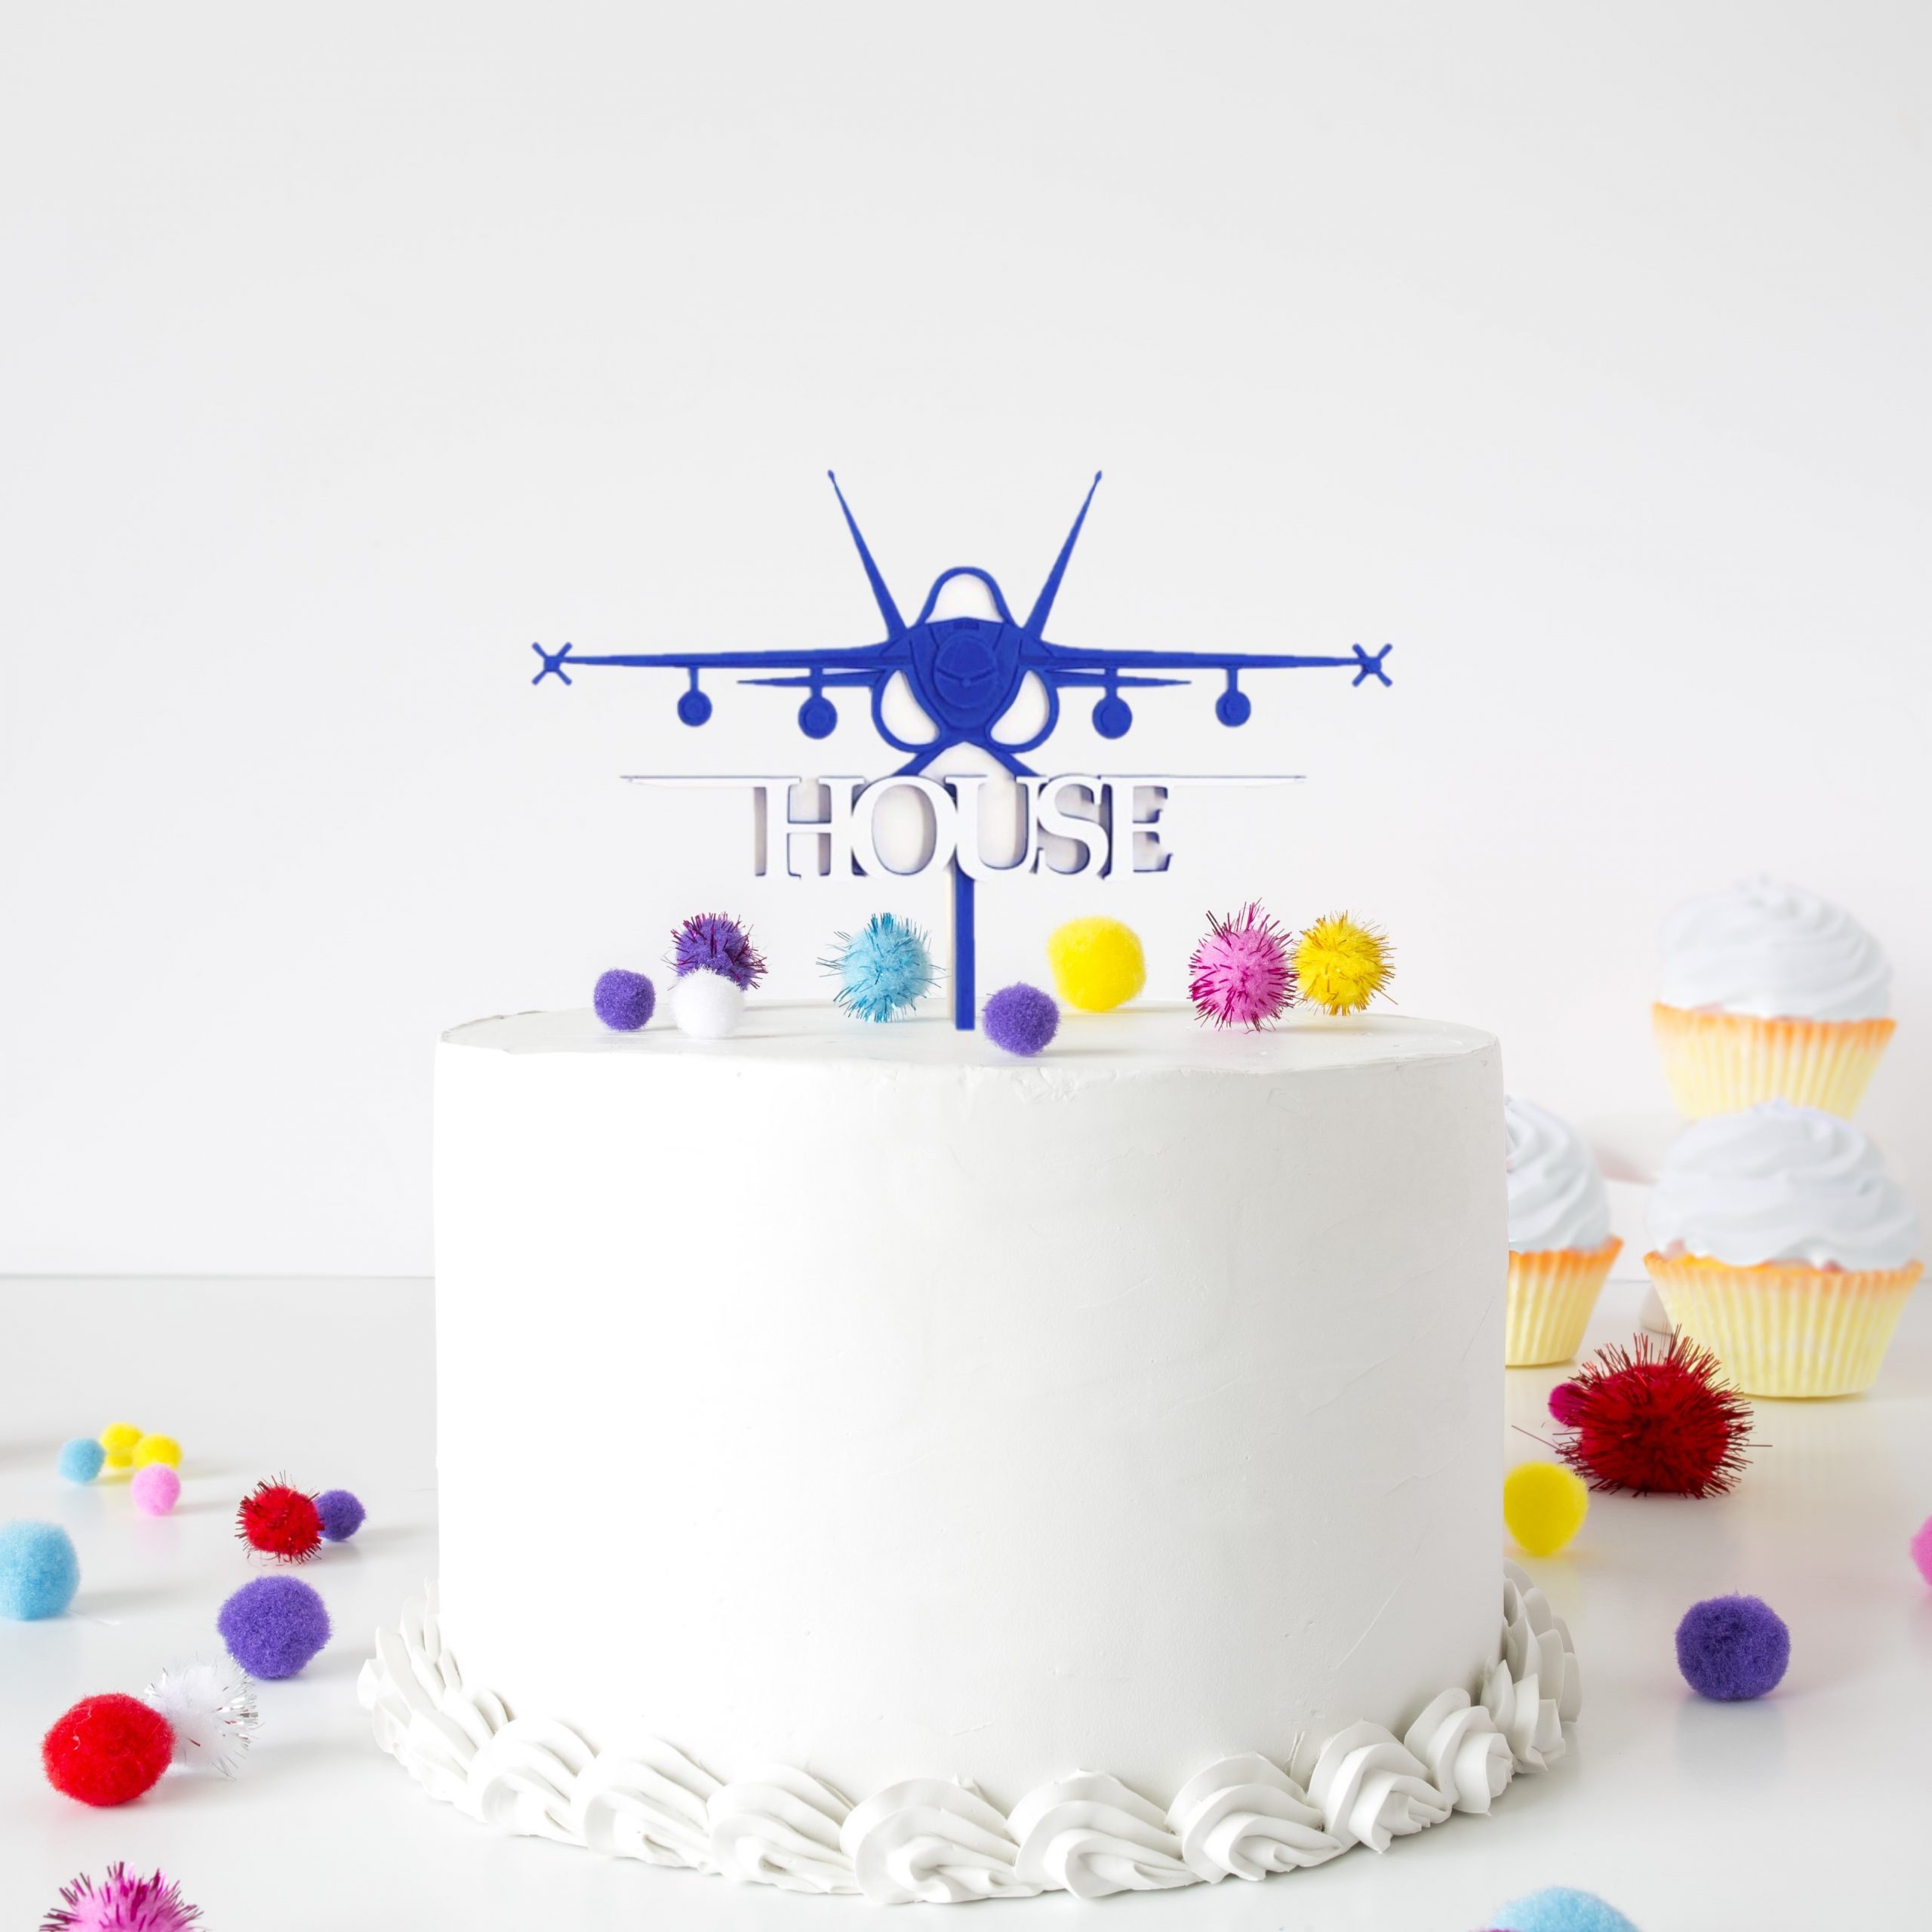 F-18 SUPER HORNET JET A4 Edible Cake Topper Icing Image Birthday Decoration 